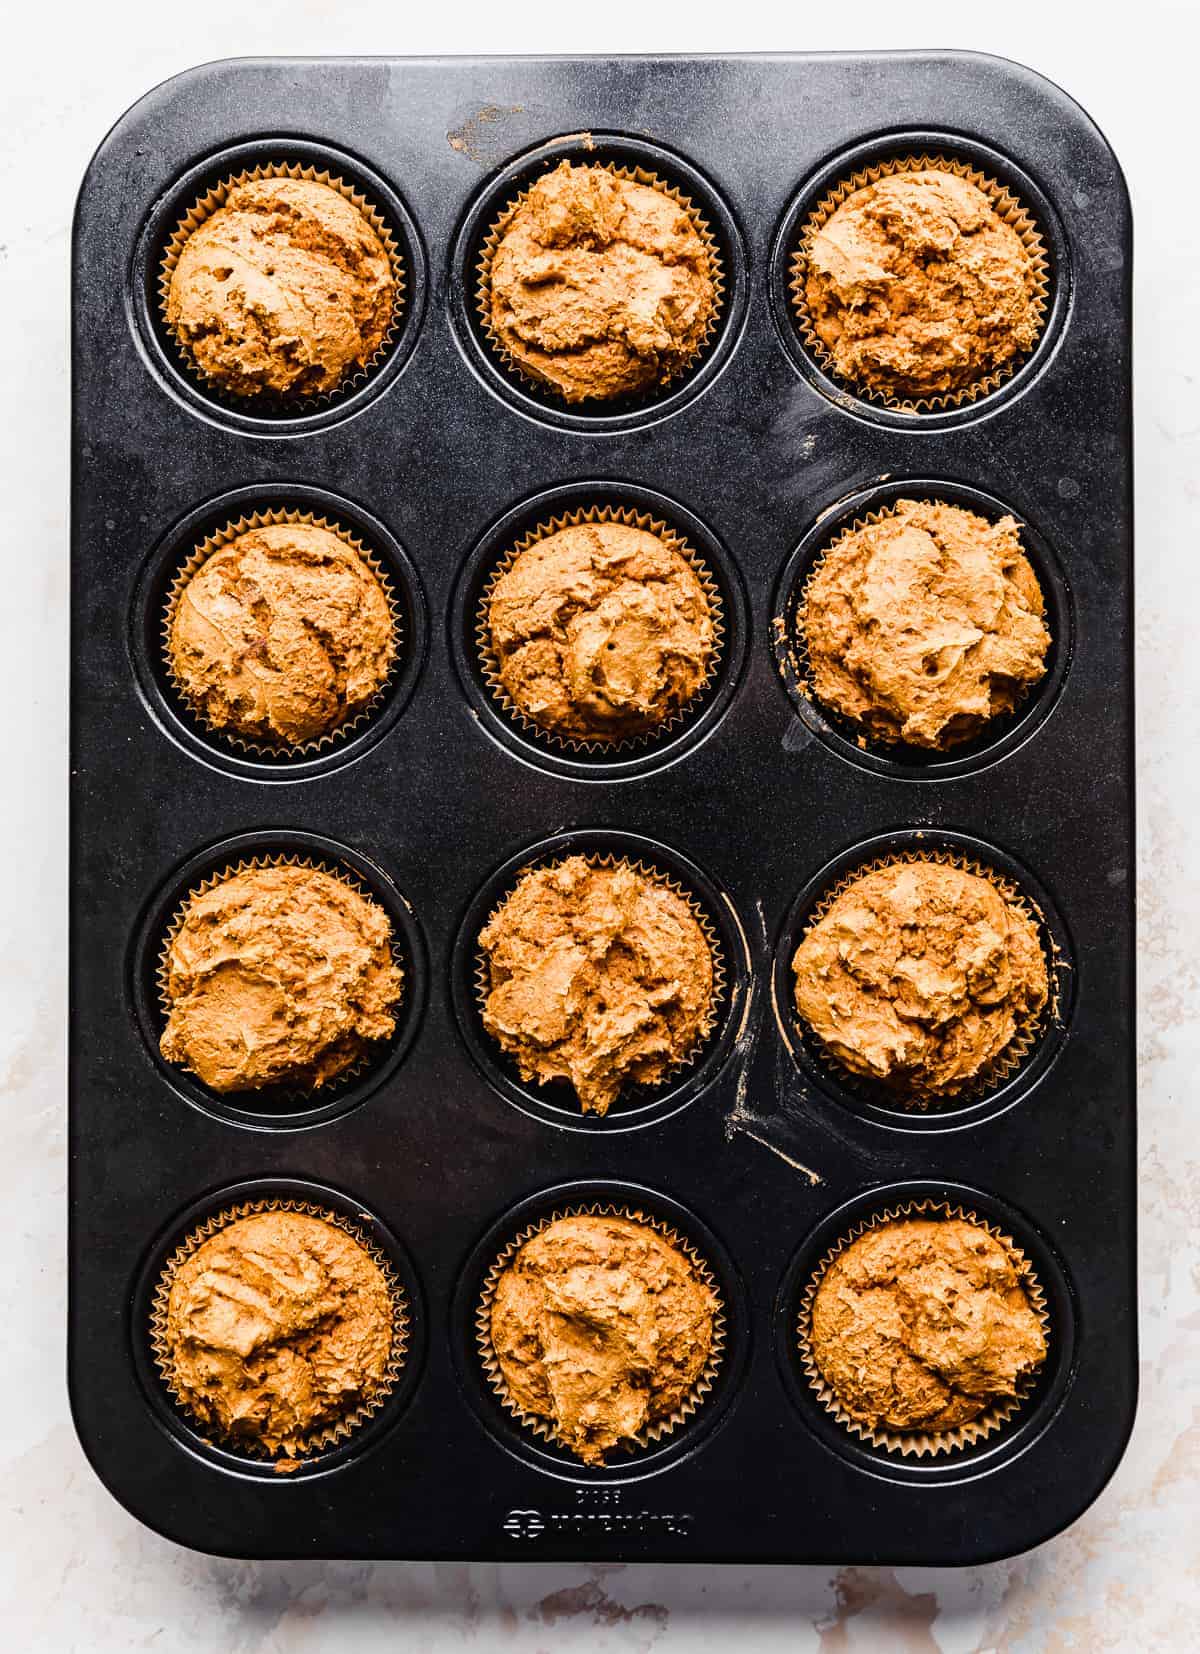 Baked 2 Ingredient Pumpkin Muffins in a 12 cavity muffin tin.